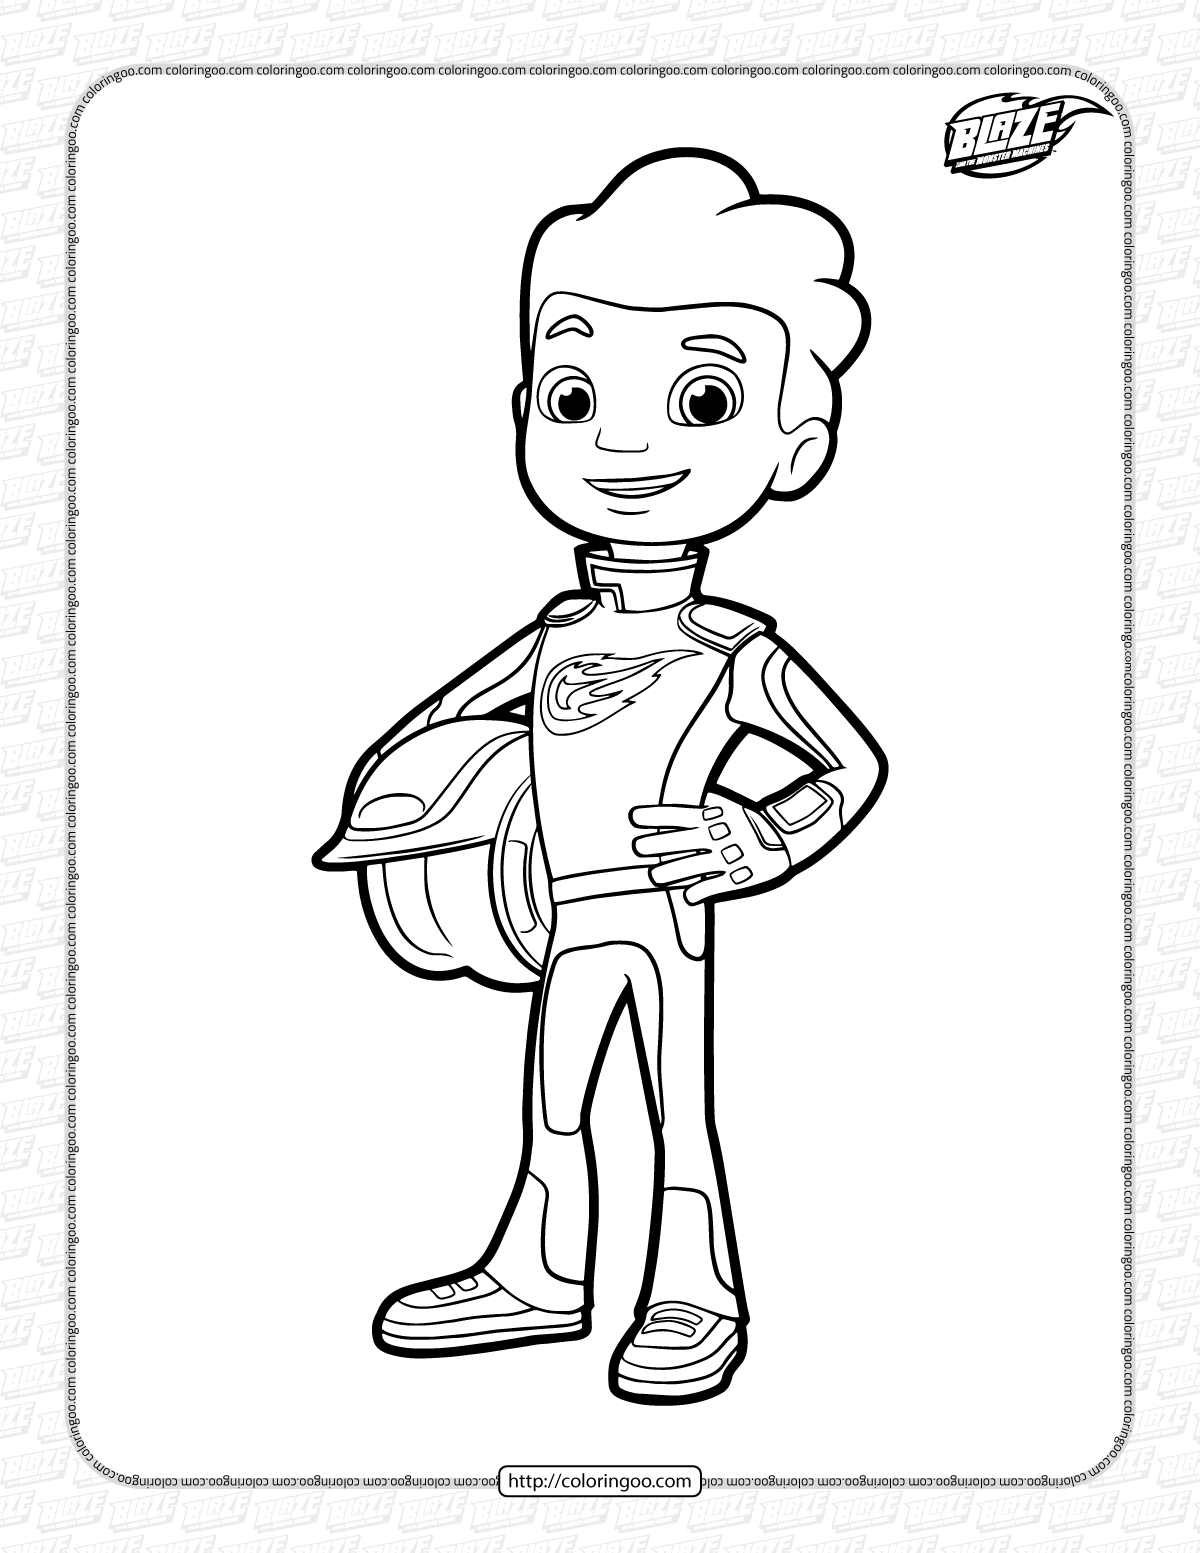 blaze and the monster machines aj coloring pages